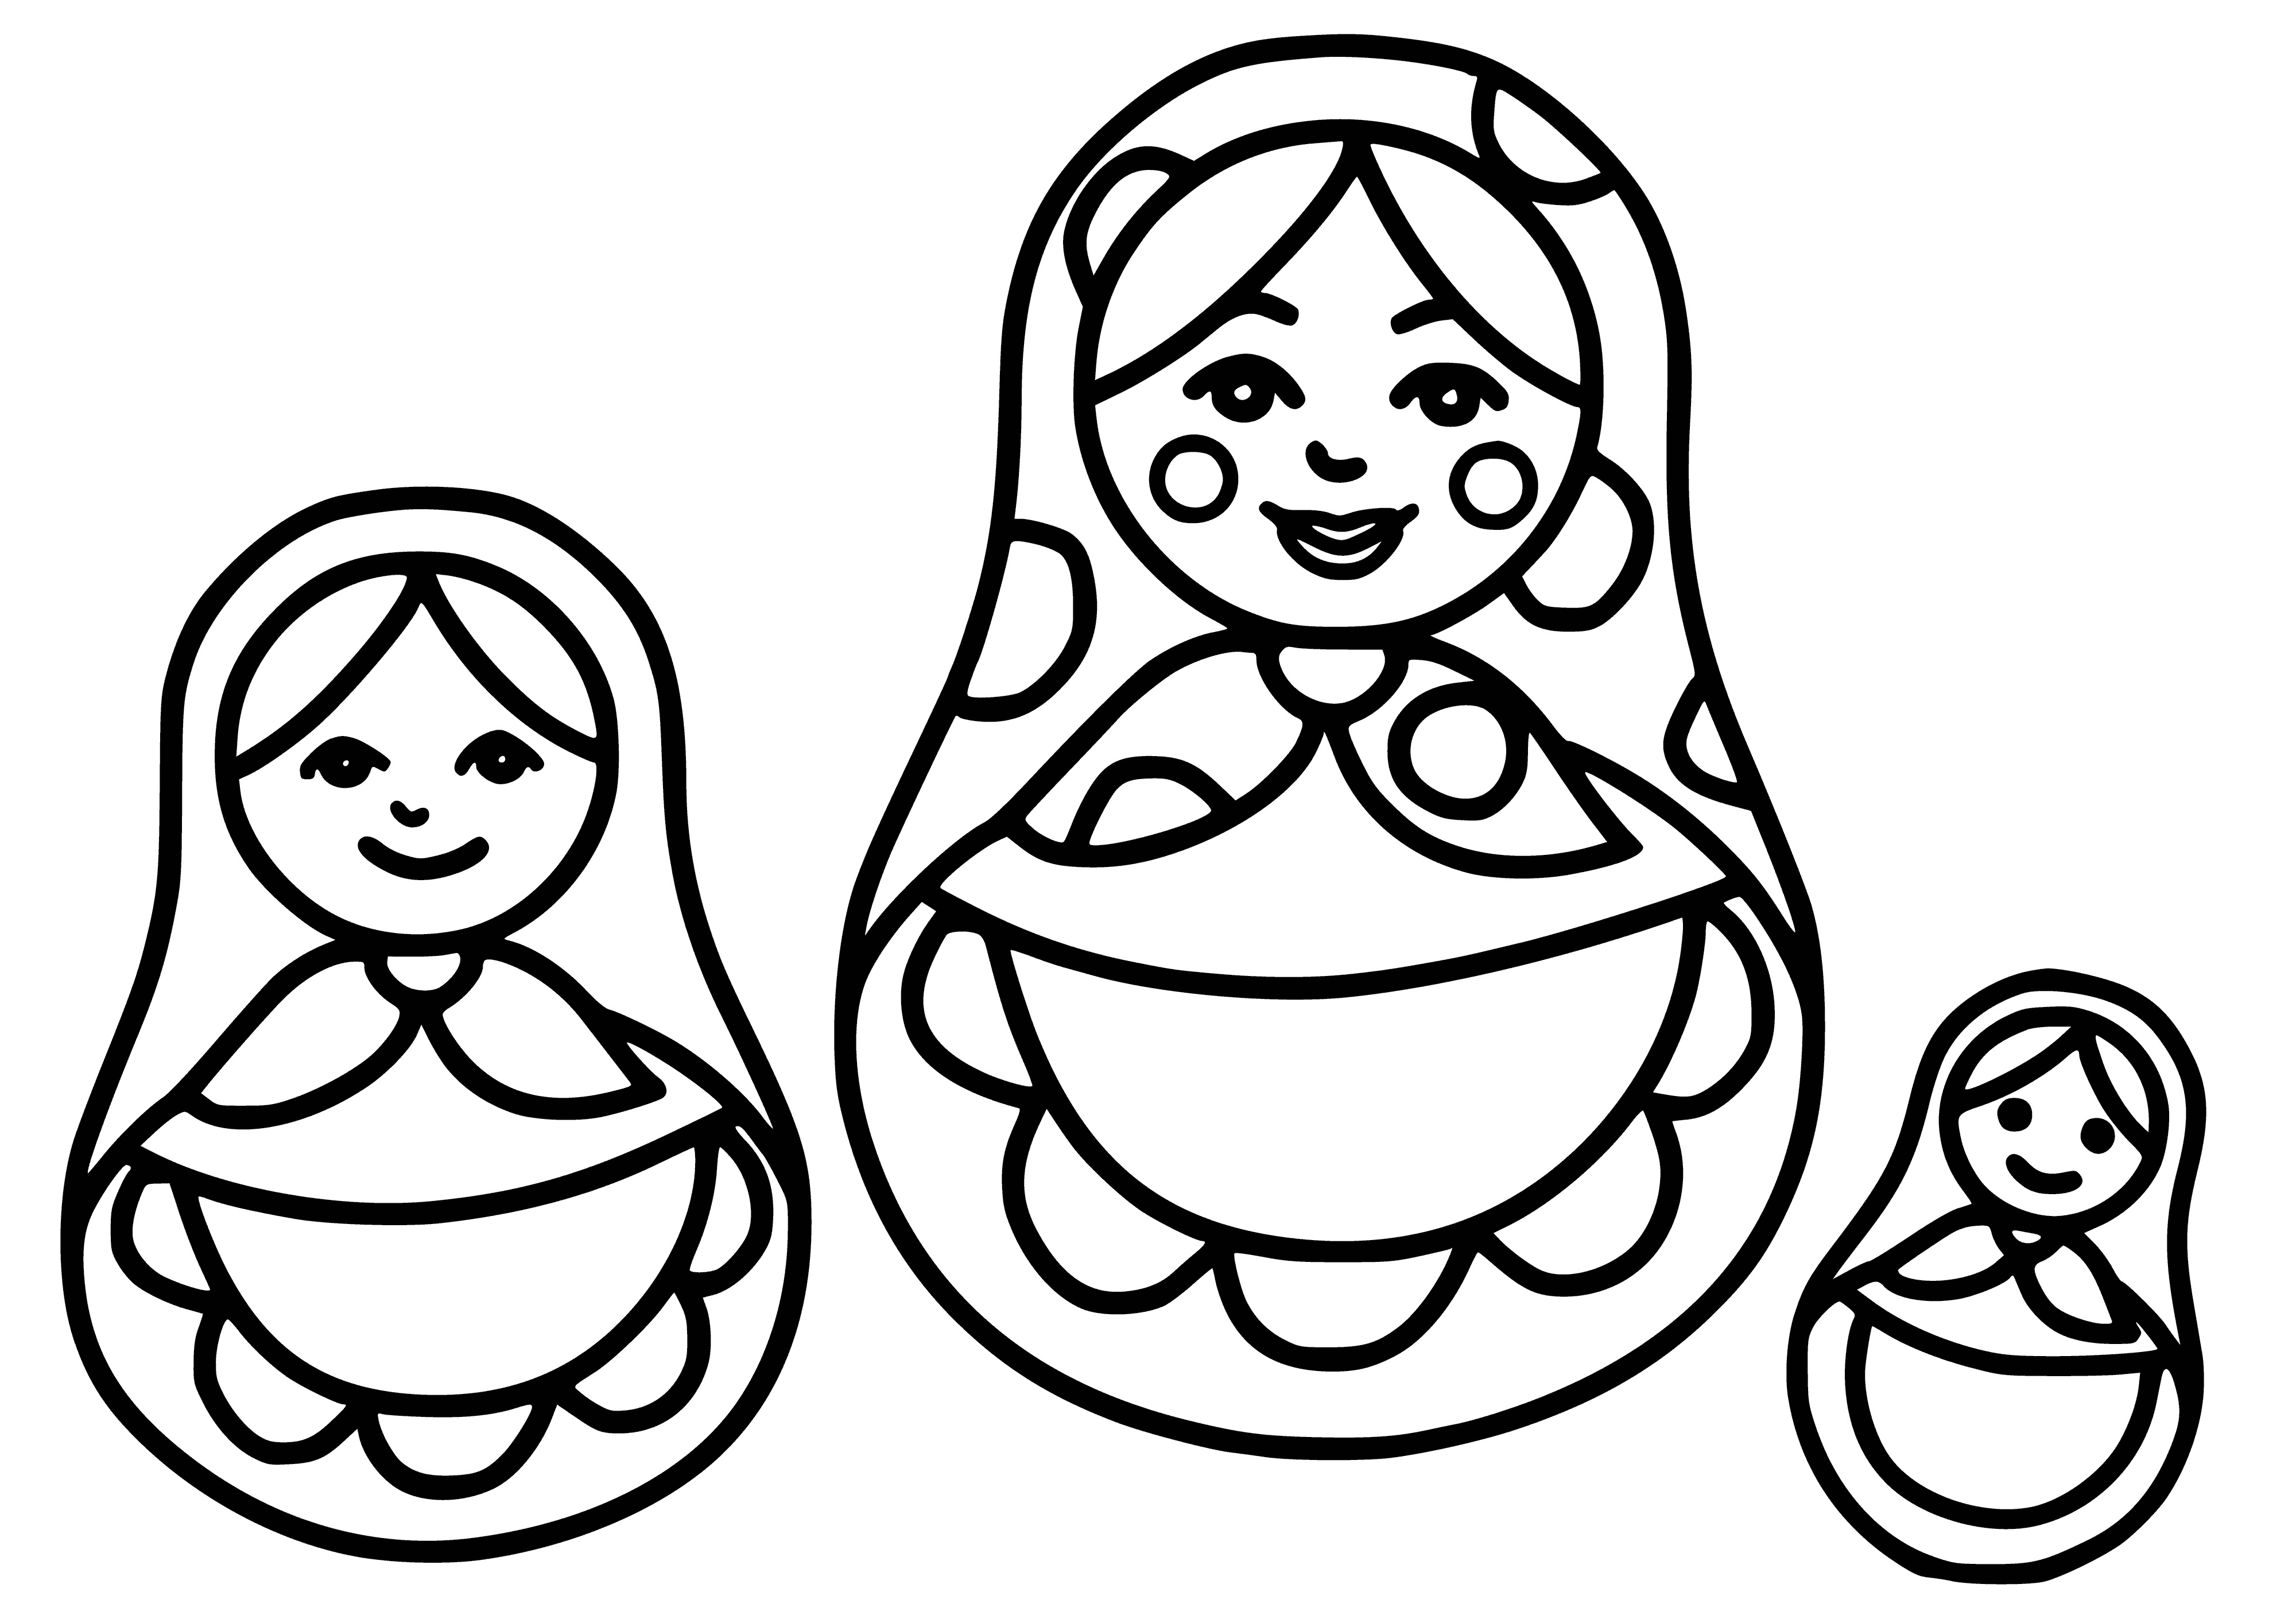 coloring page: Matryoshka dolls have nesting dolls in different sizes and colors, from largest to smallest from bottom to top.